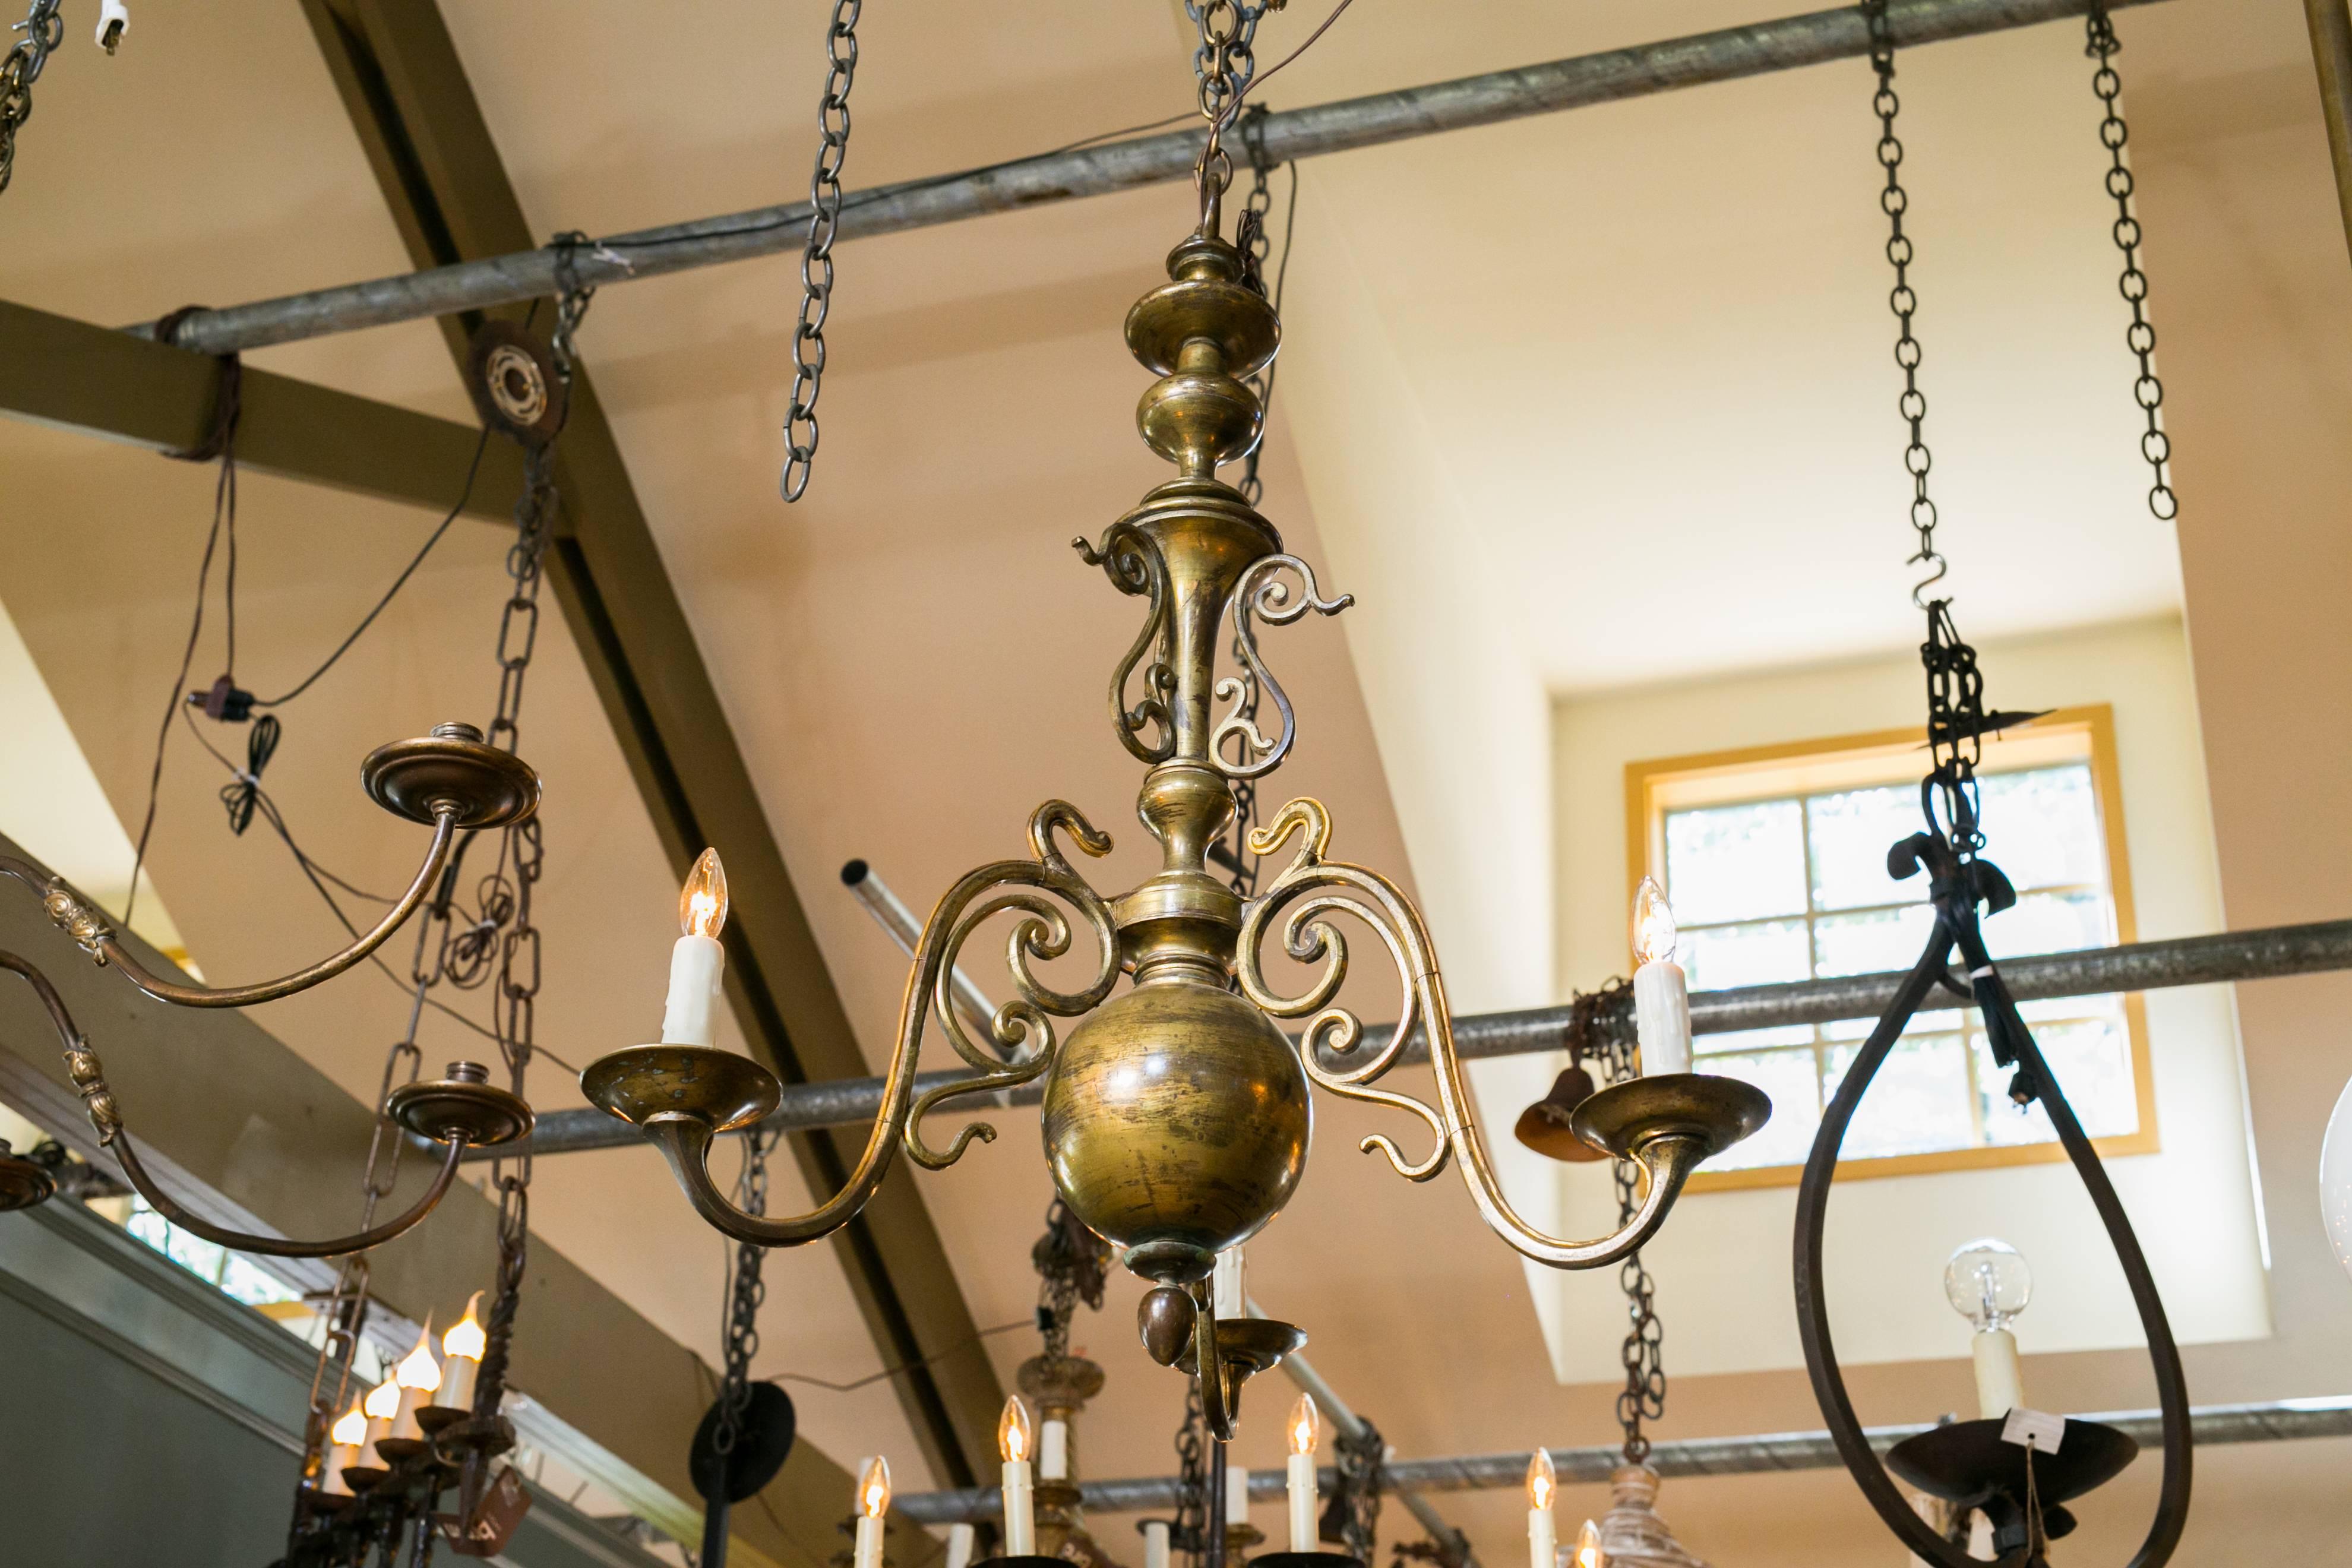 Heavy bronze Flemish style chandelier, circa 1900. Interesting patina on the metal. Newly rewired for use in the USA with all UL approved parts and three candelabra sockets. Comes with matching chain and canopy.